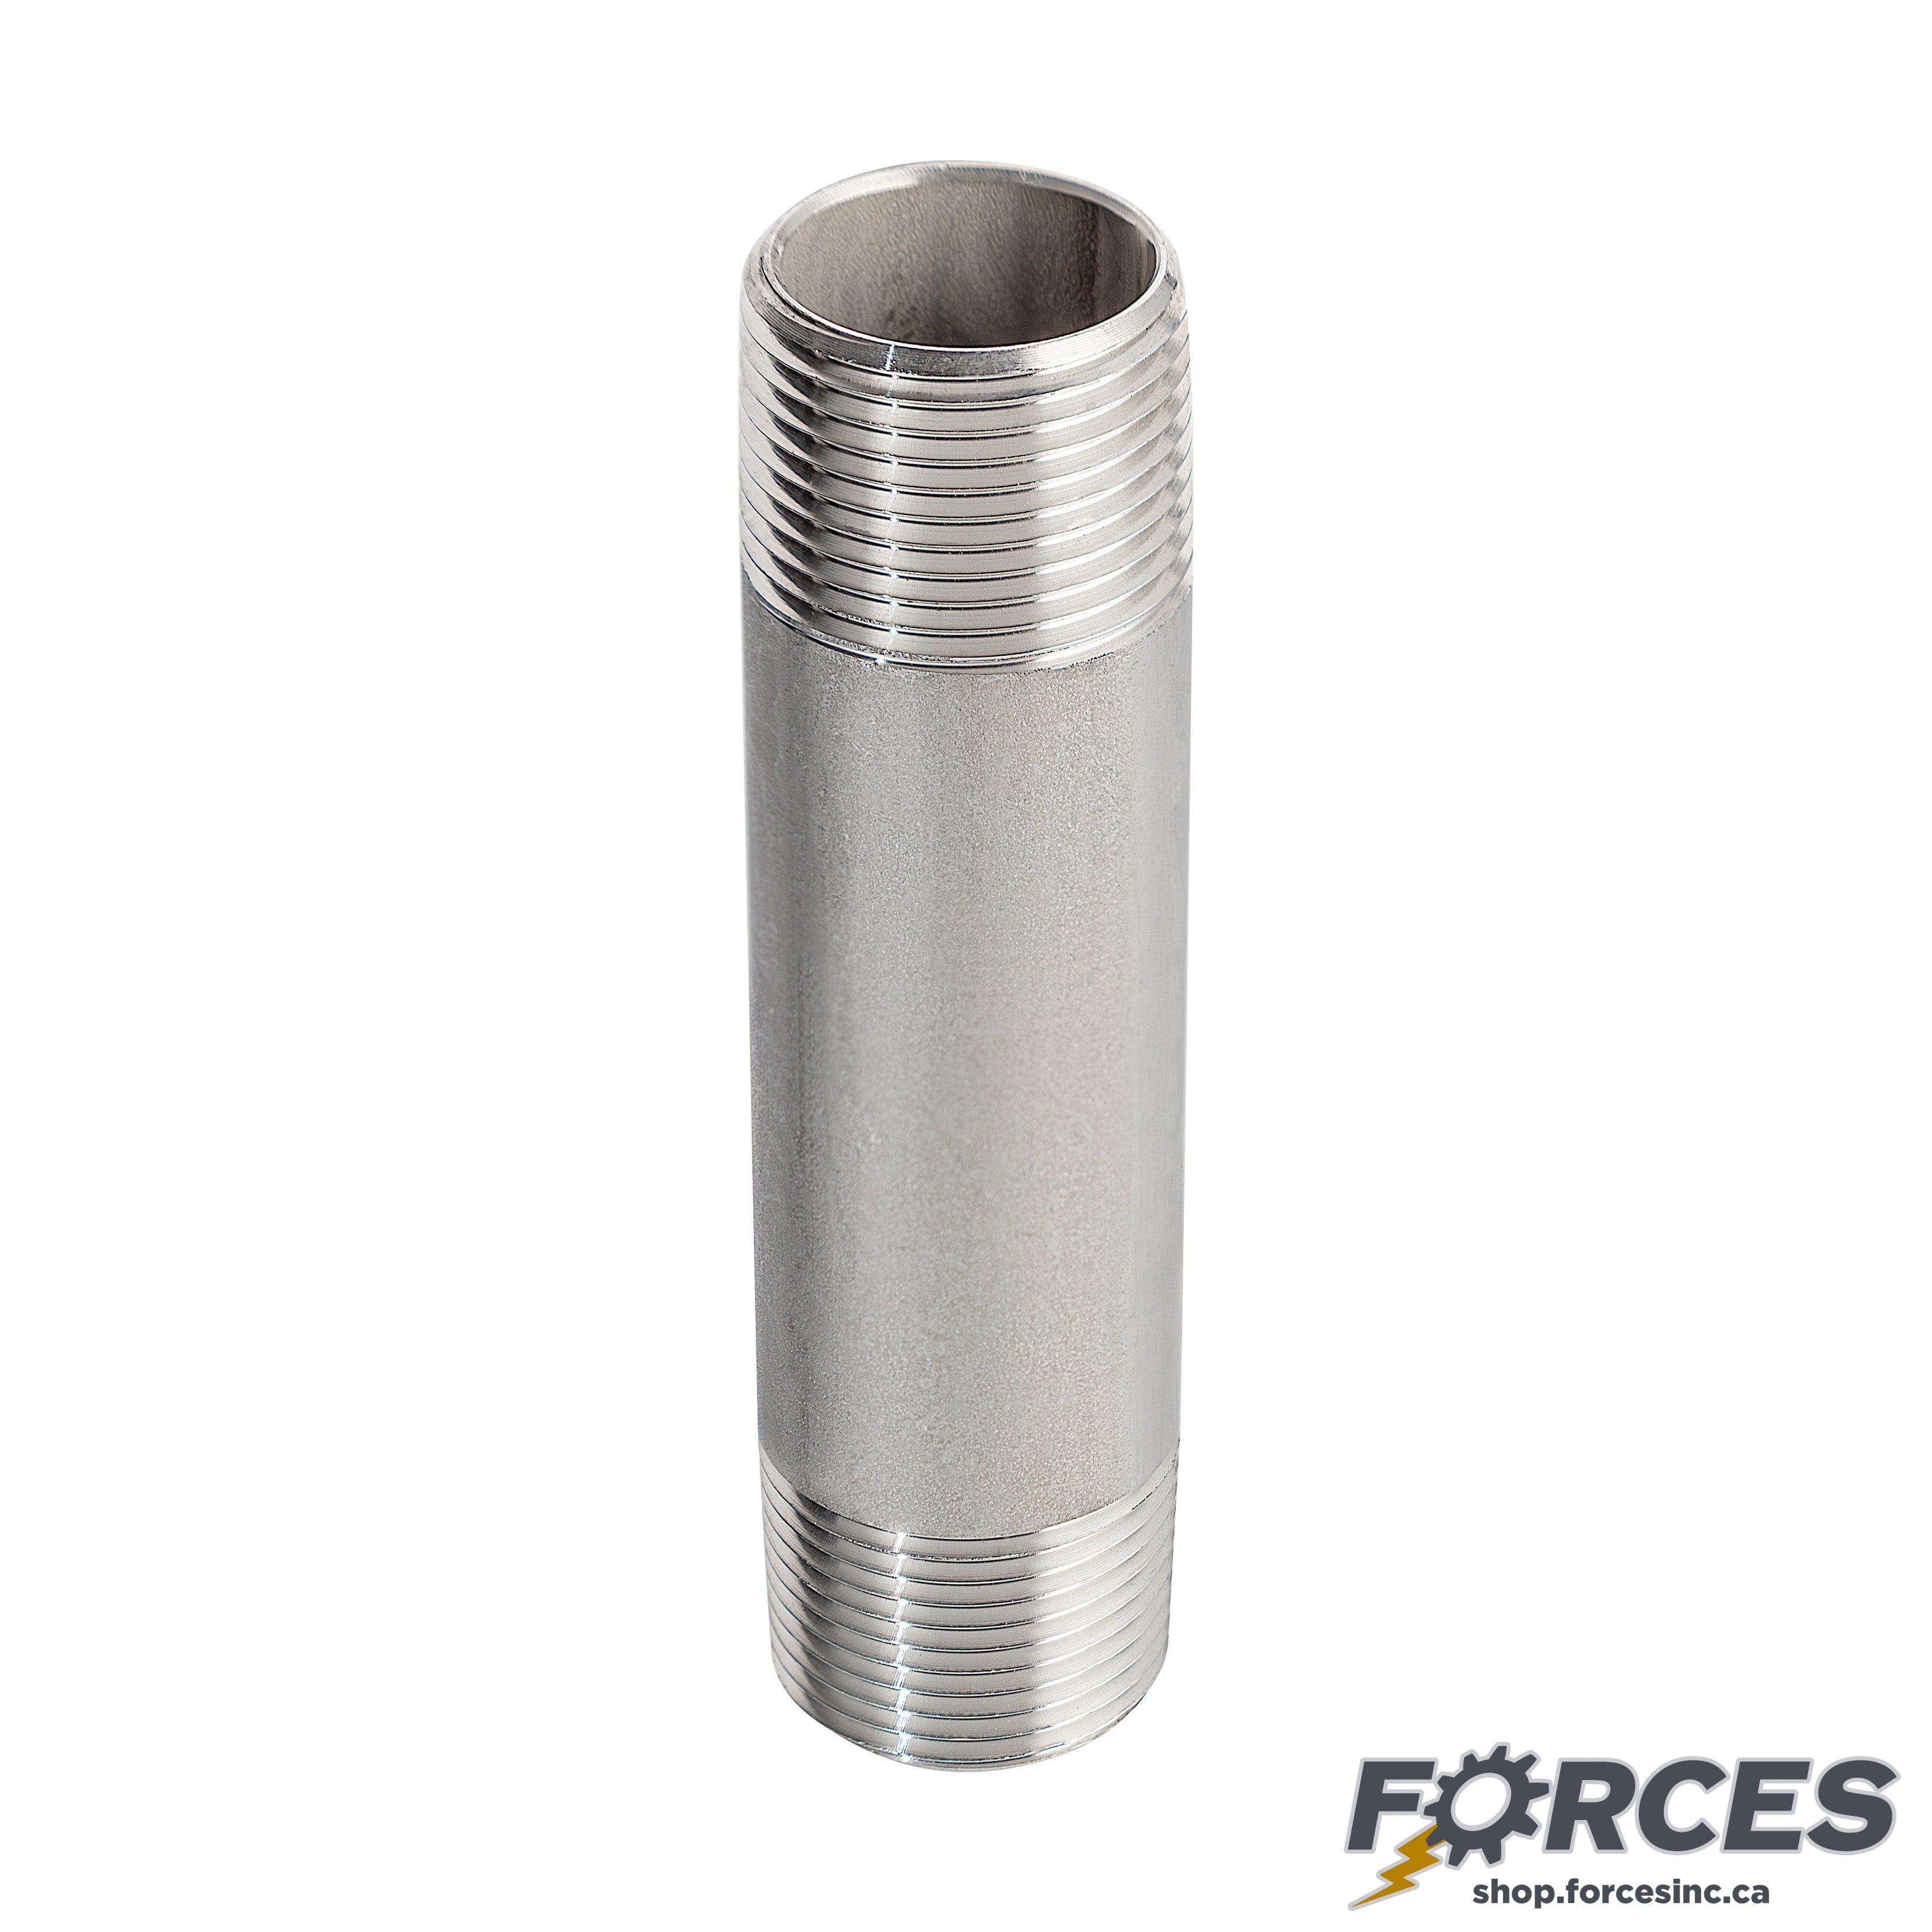 1/2" X 6" Long Nipple - Stainless Steel 316 - Forces Inc